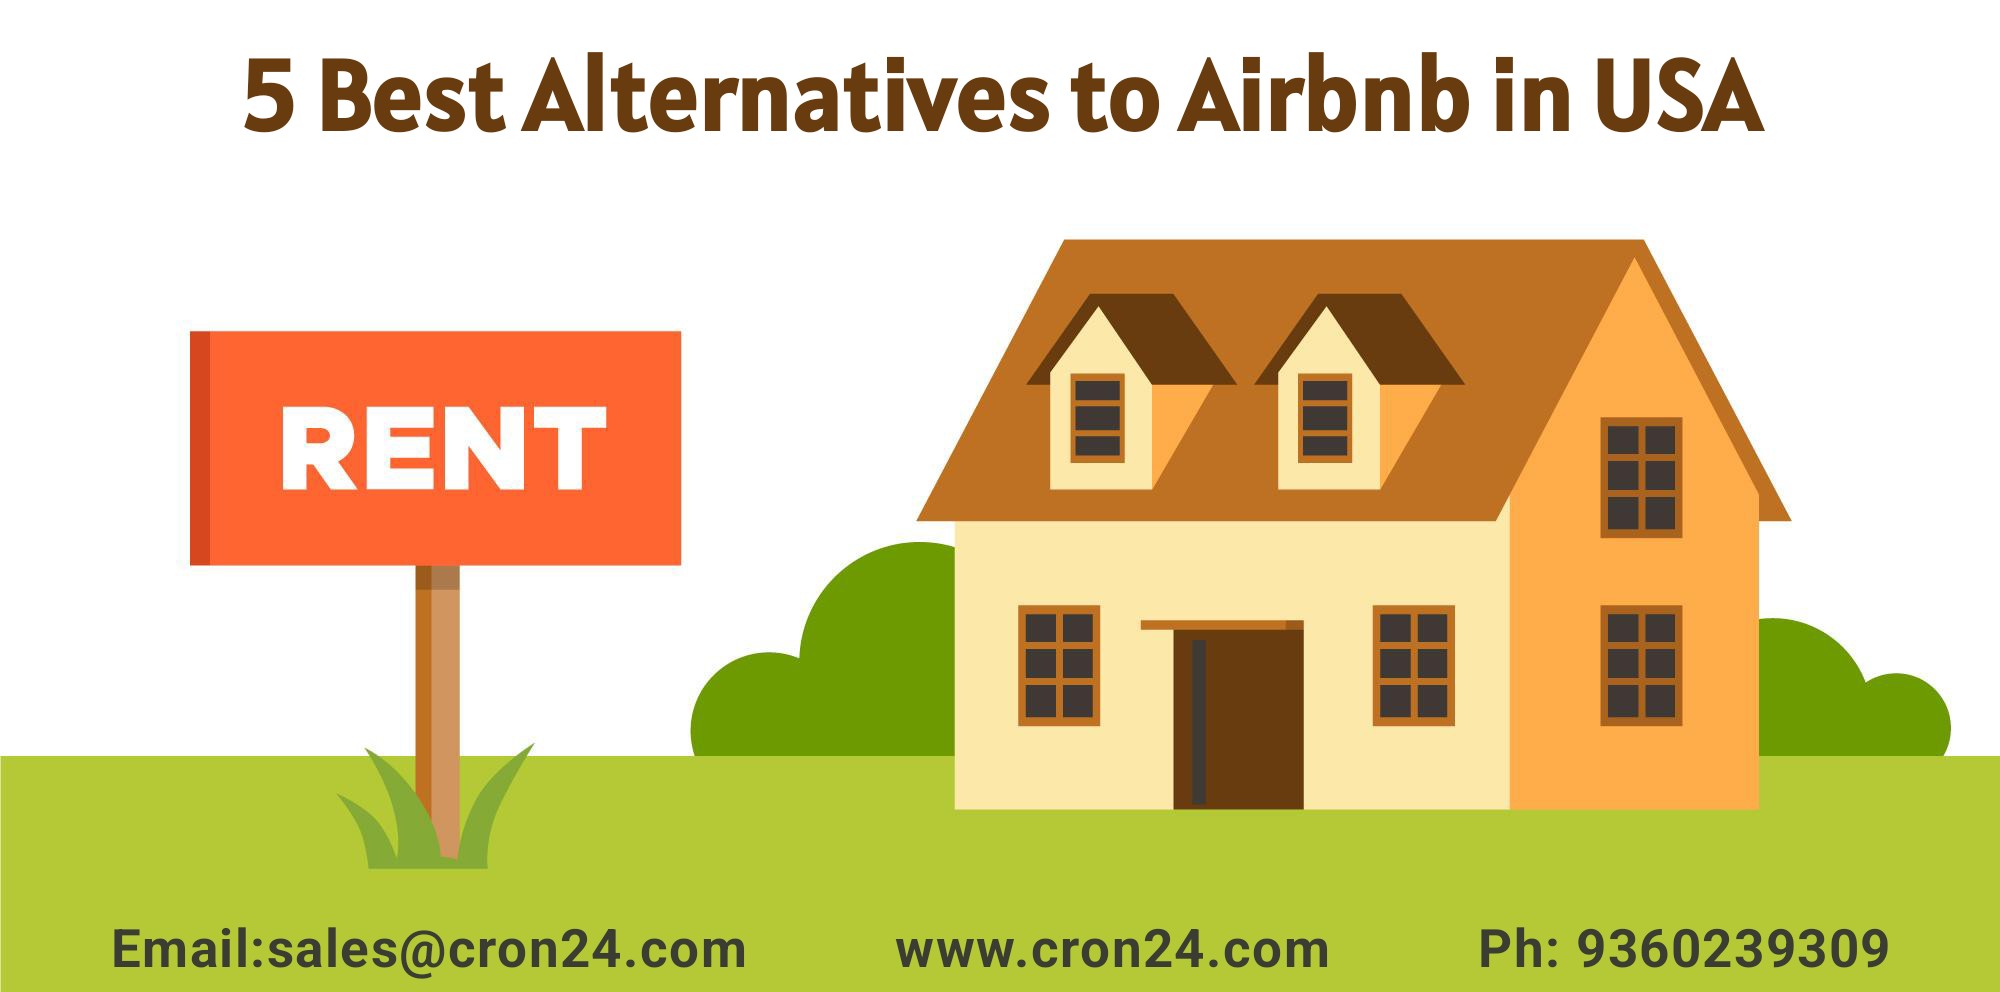 What is the best alternative to Airbnb in USA?